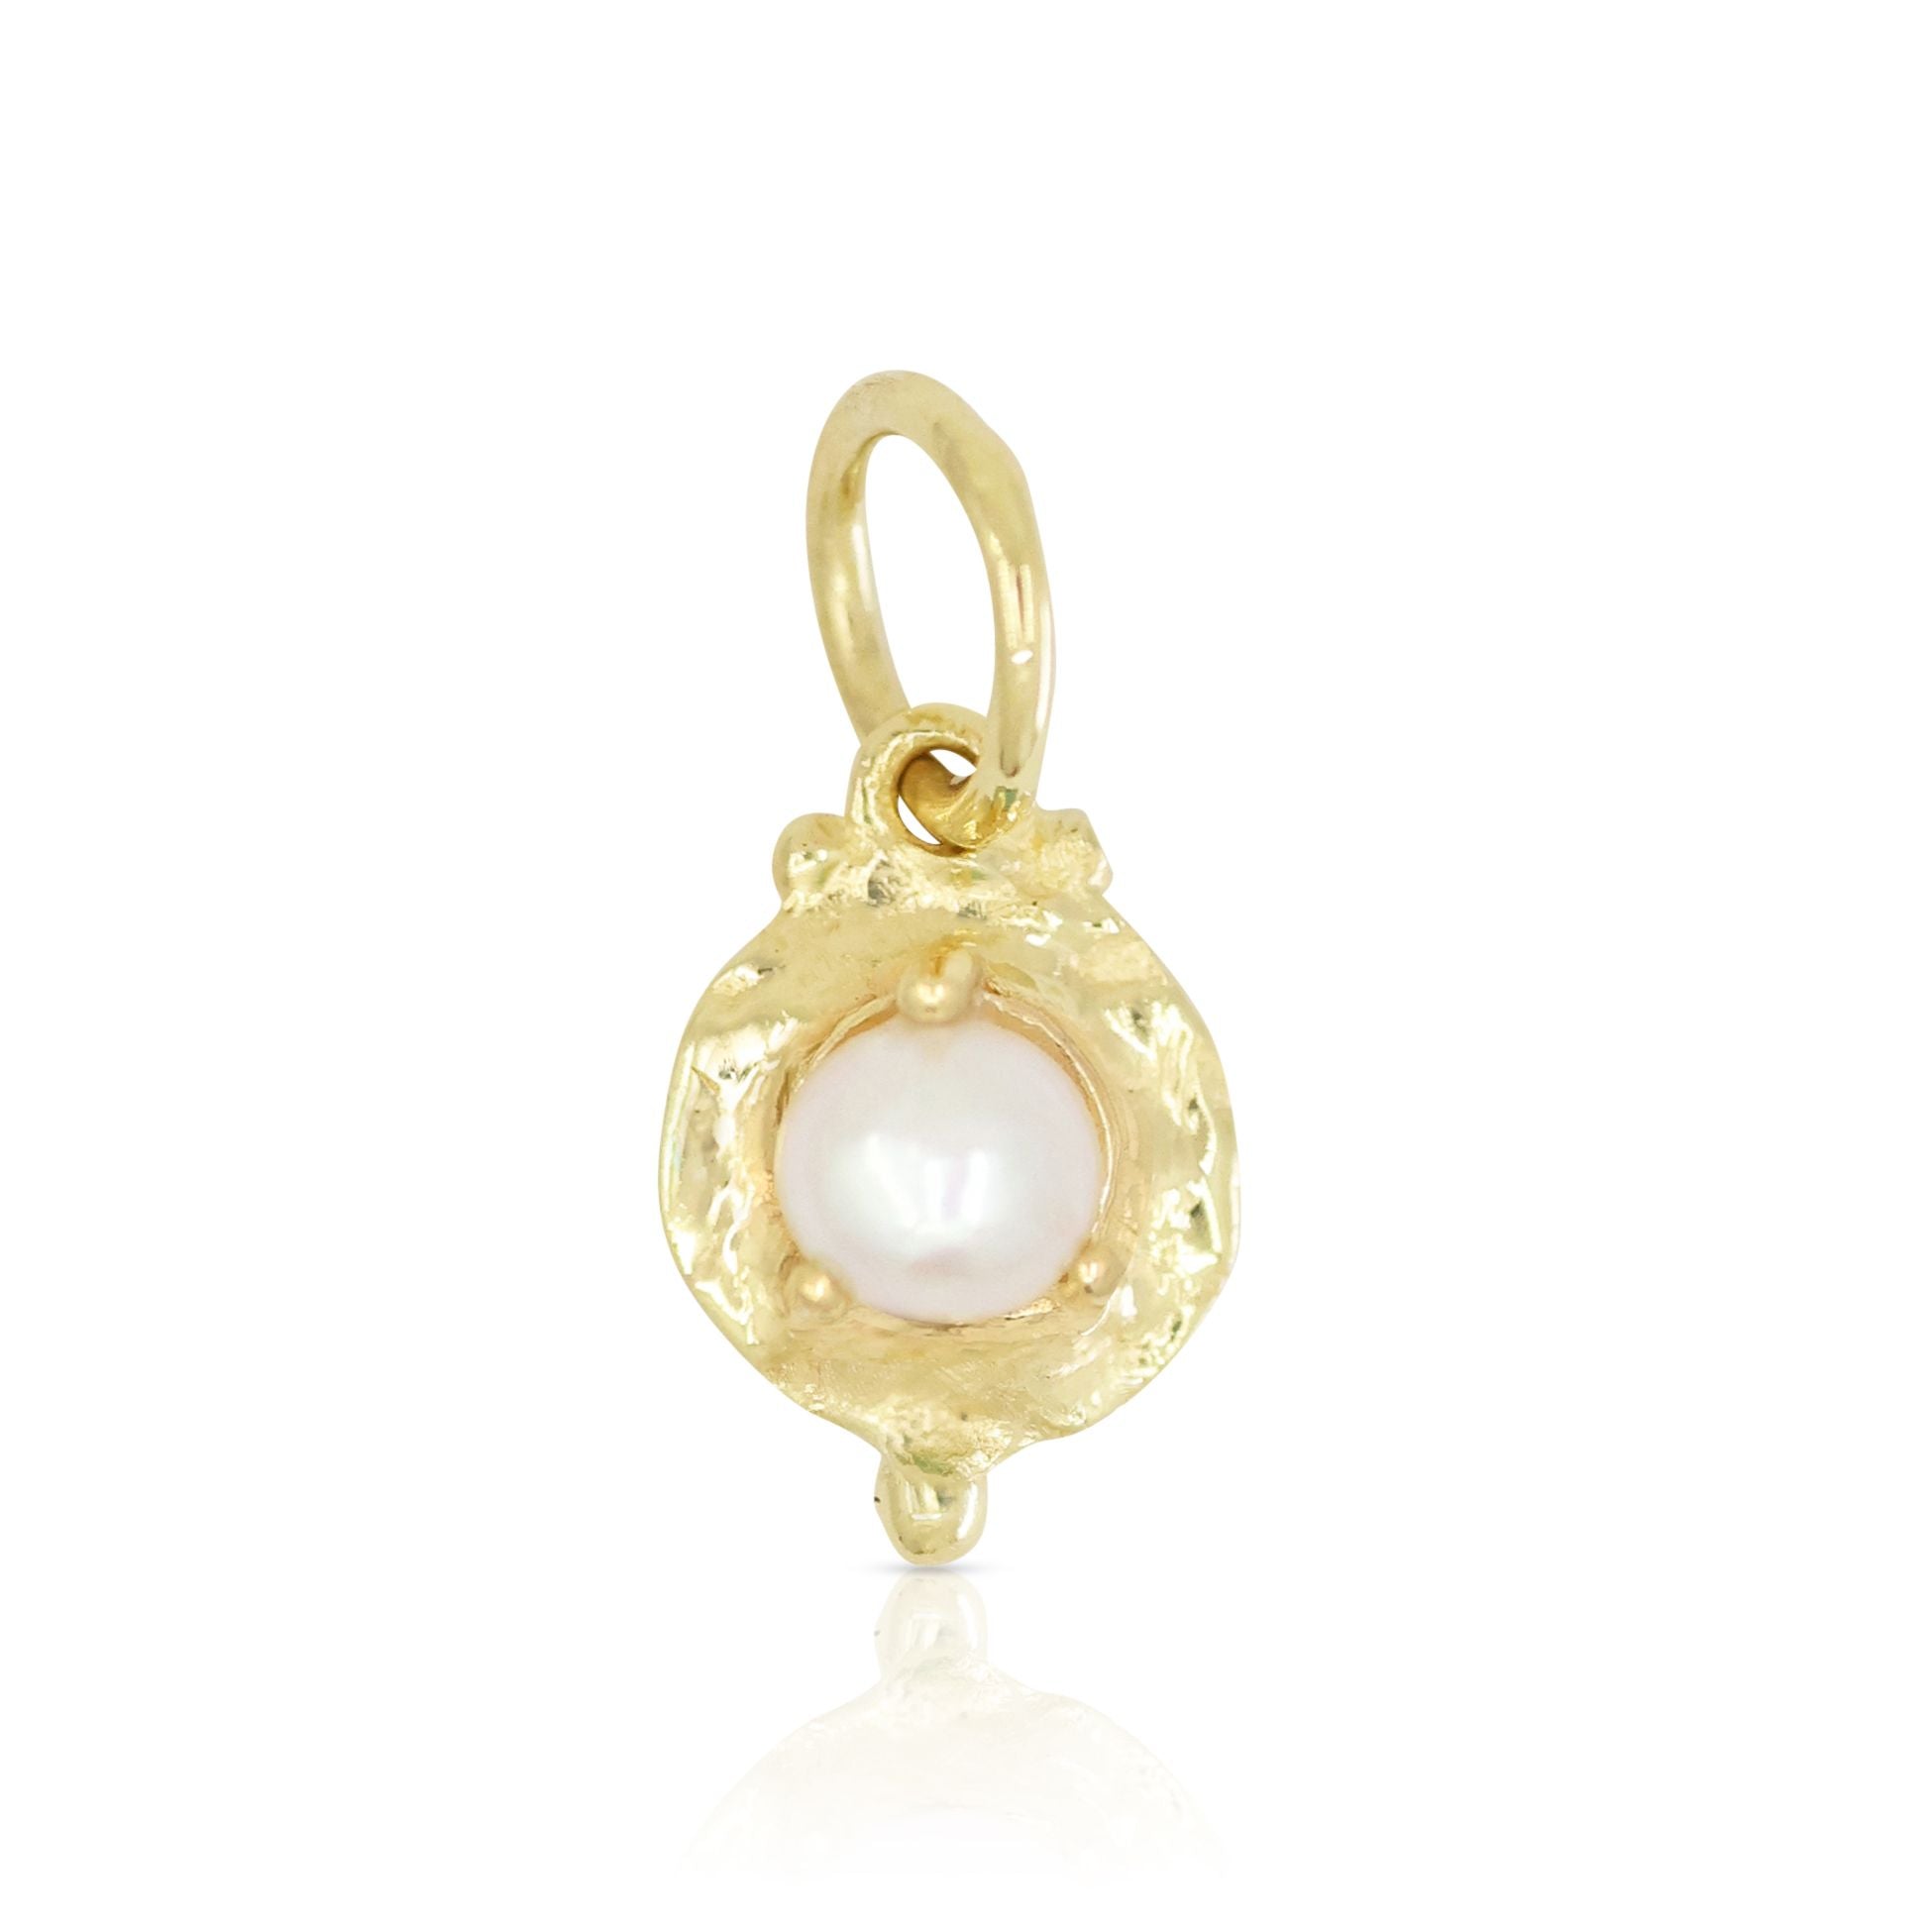 Toni May June Pearl Gold Birthstone Necklace Charm